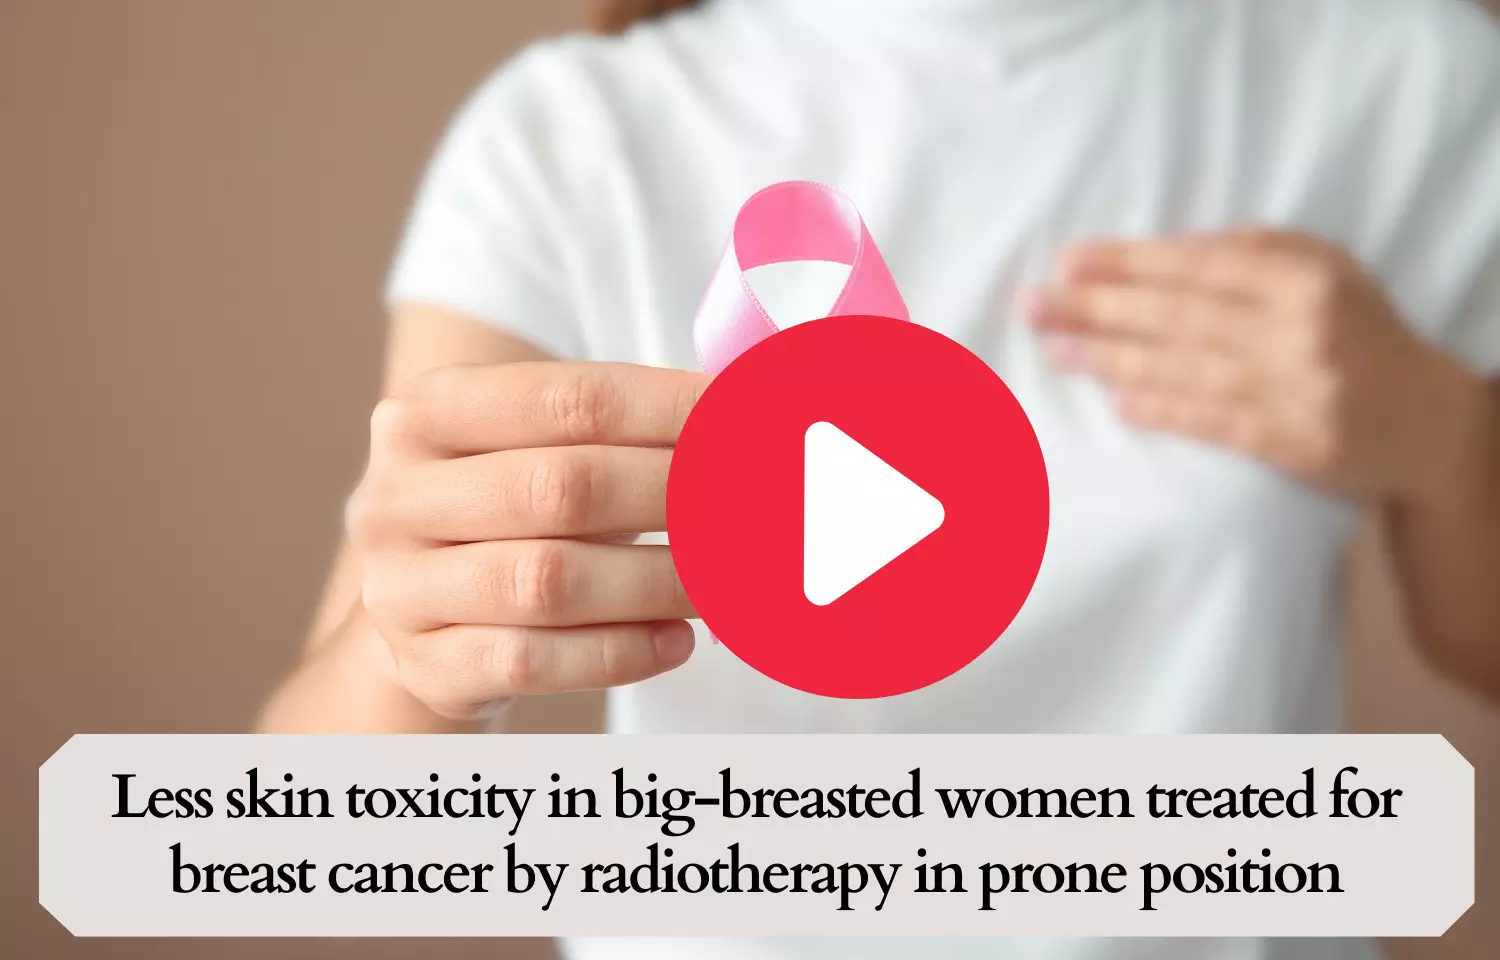 Less skin toxicity in big-breasted women treated for breast cancer by radiotherapy in prone position